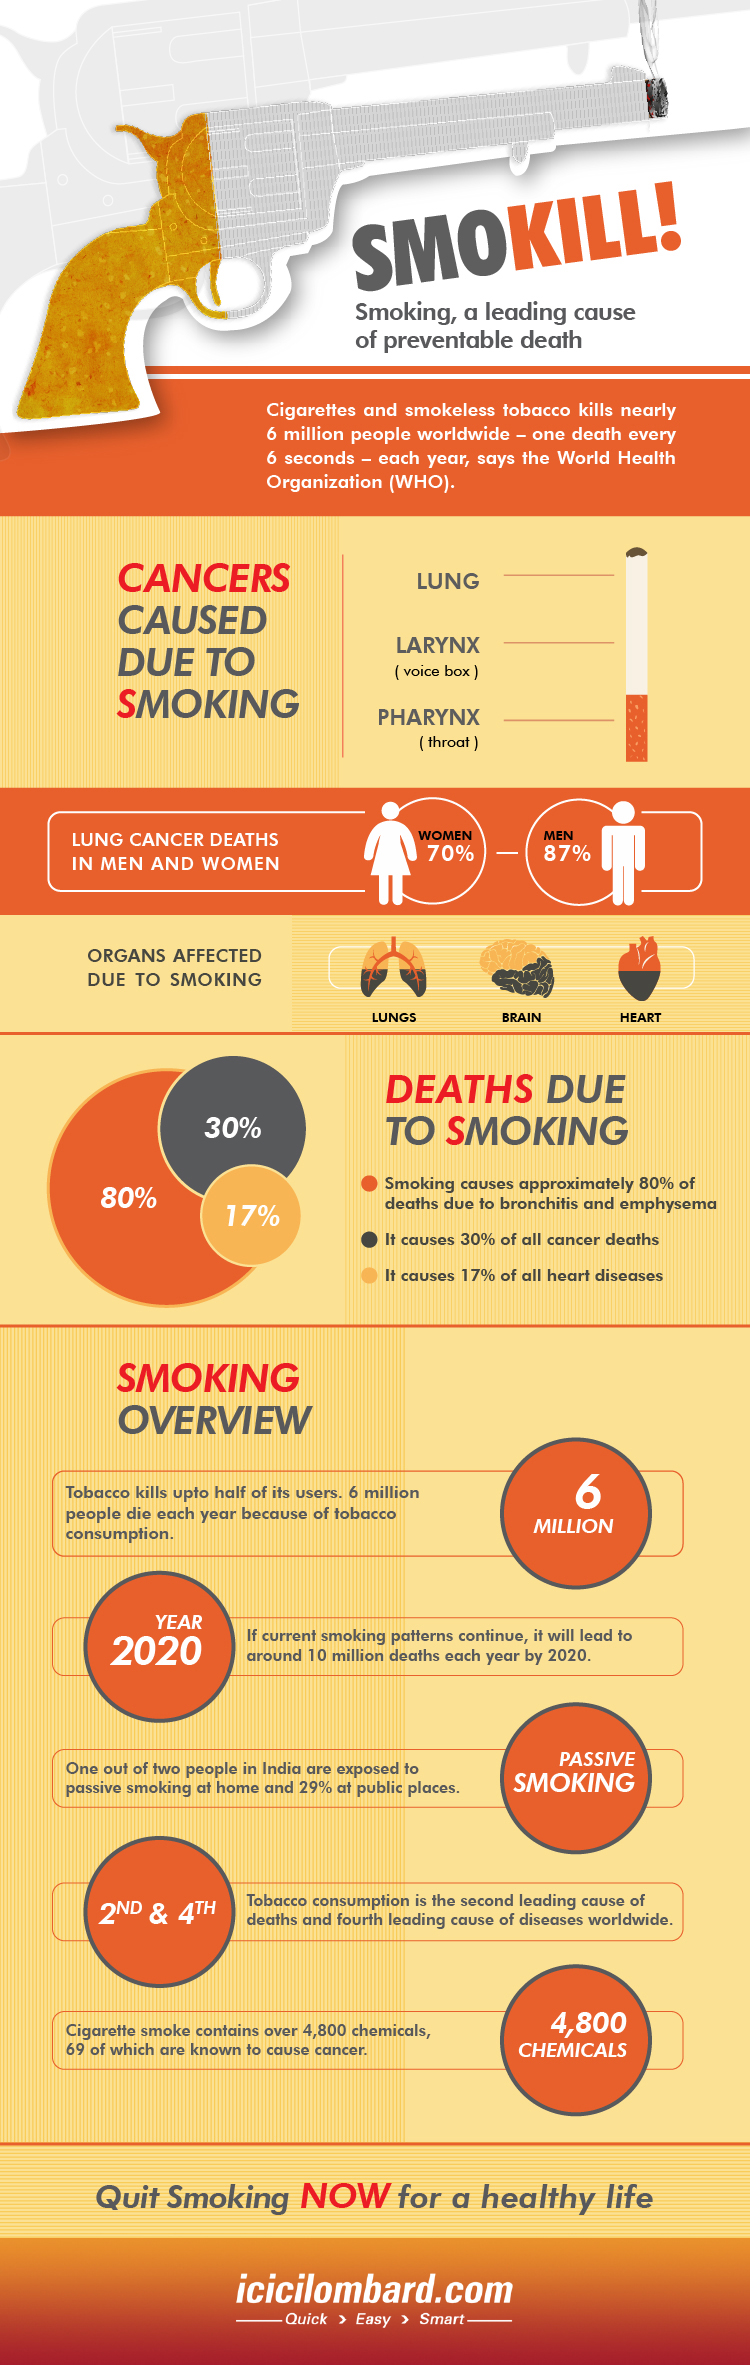 Smoking: A Leading Cause of Preventable Death